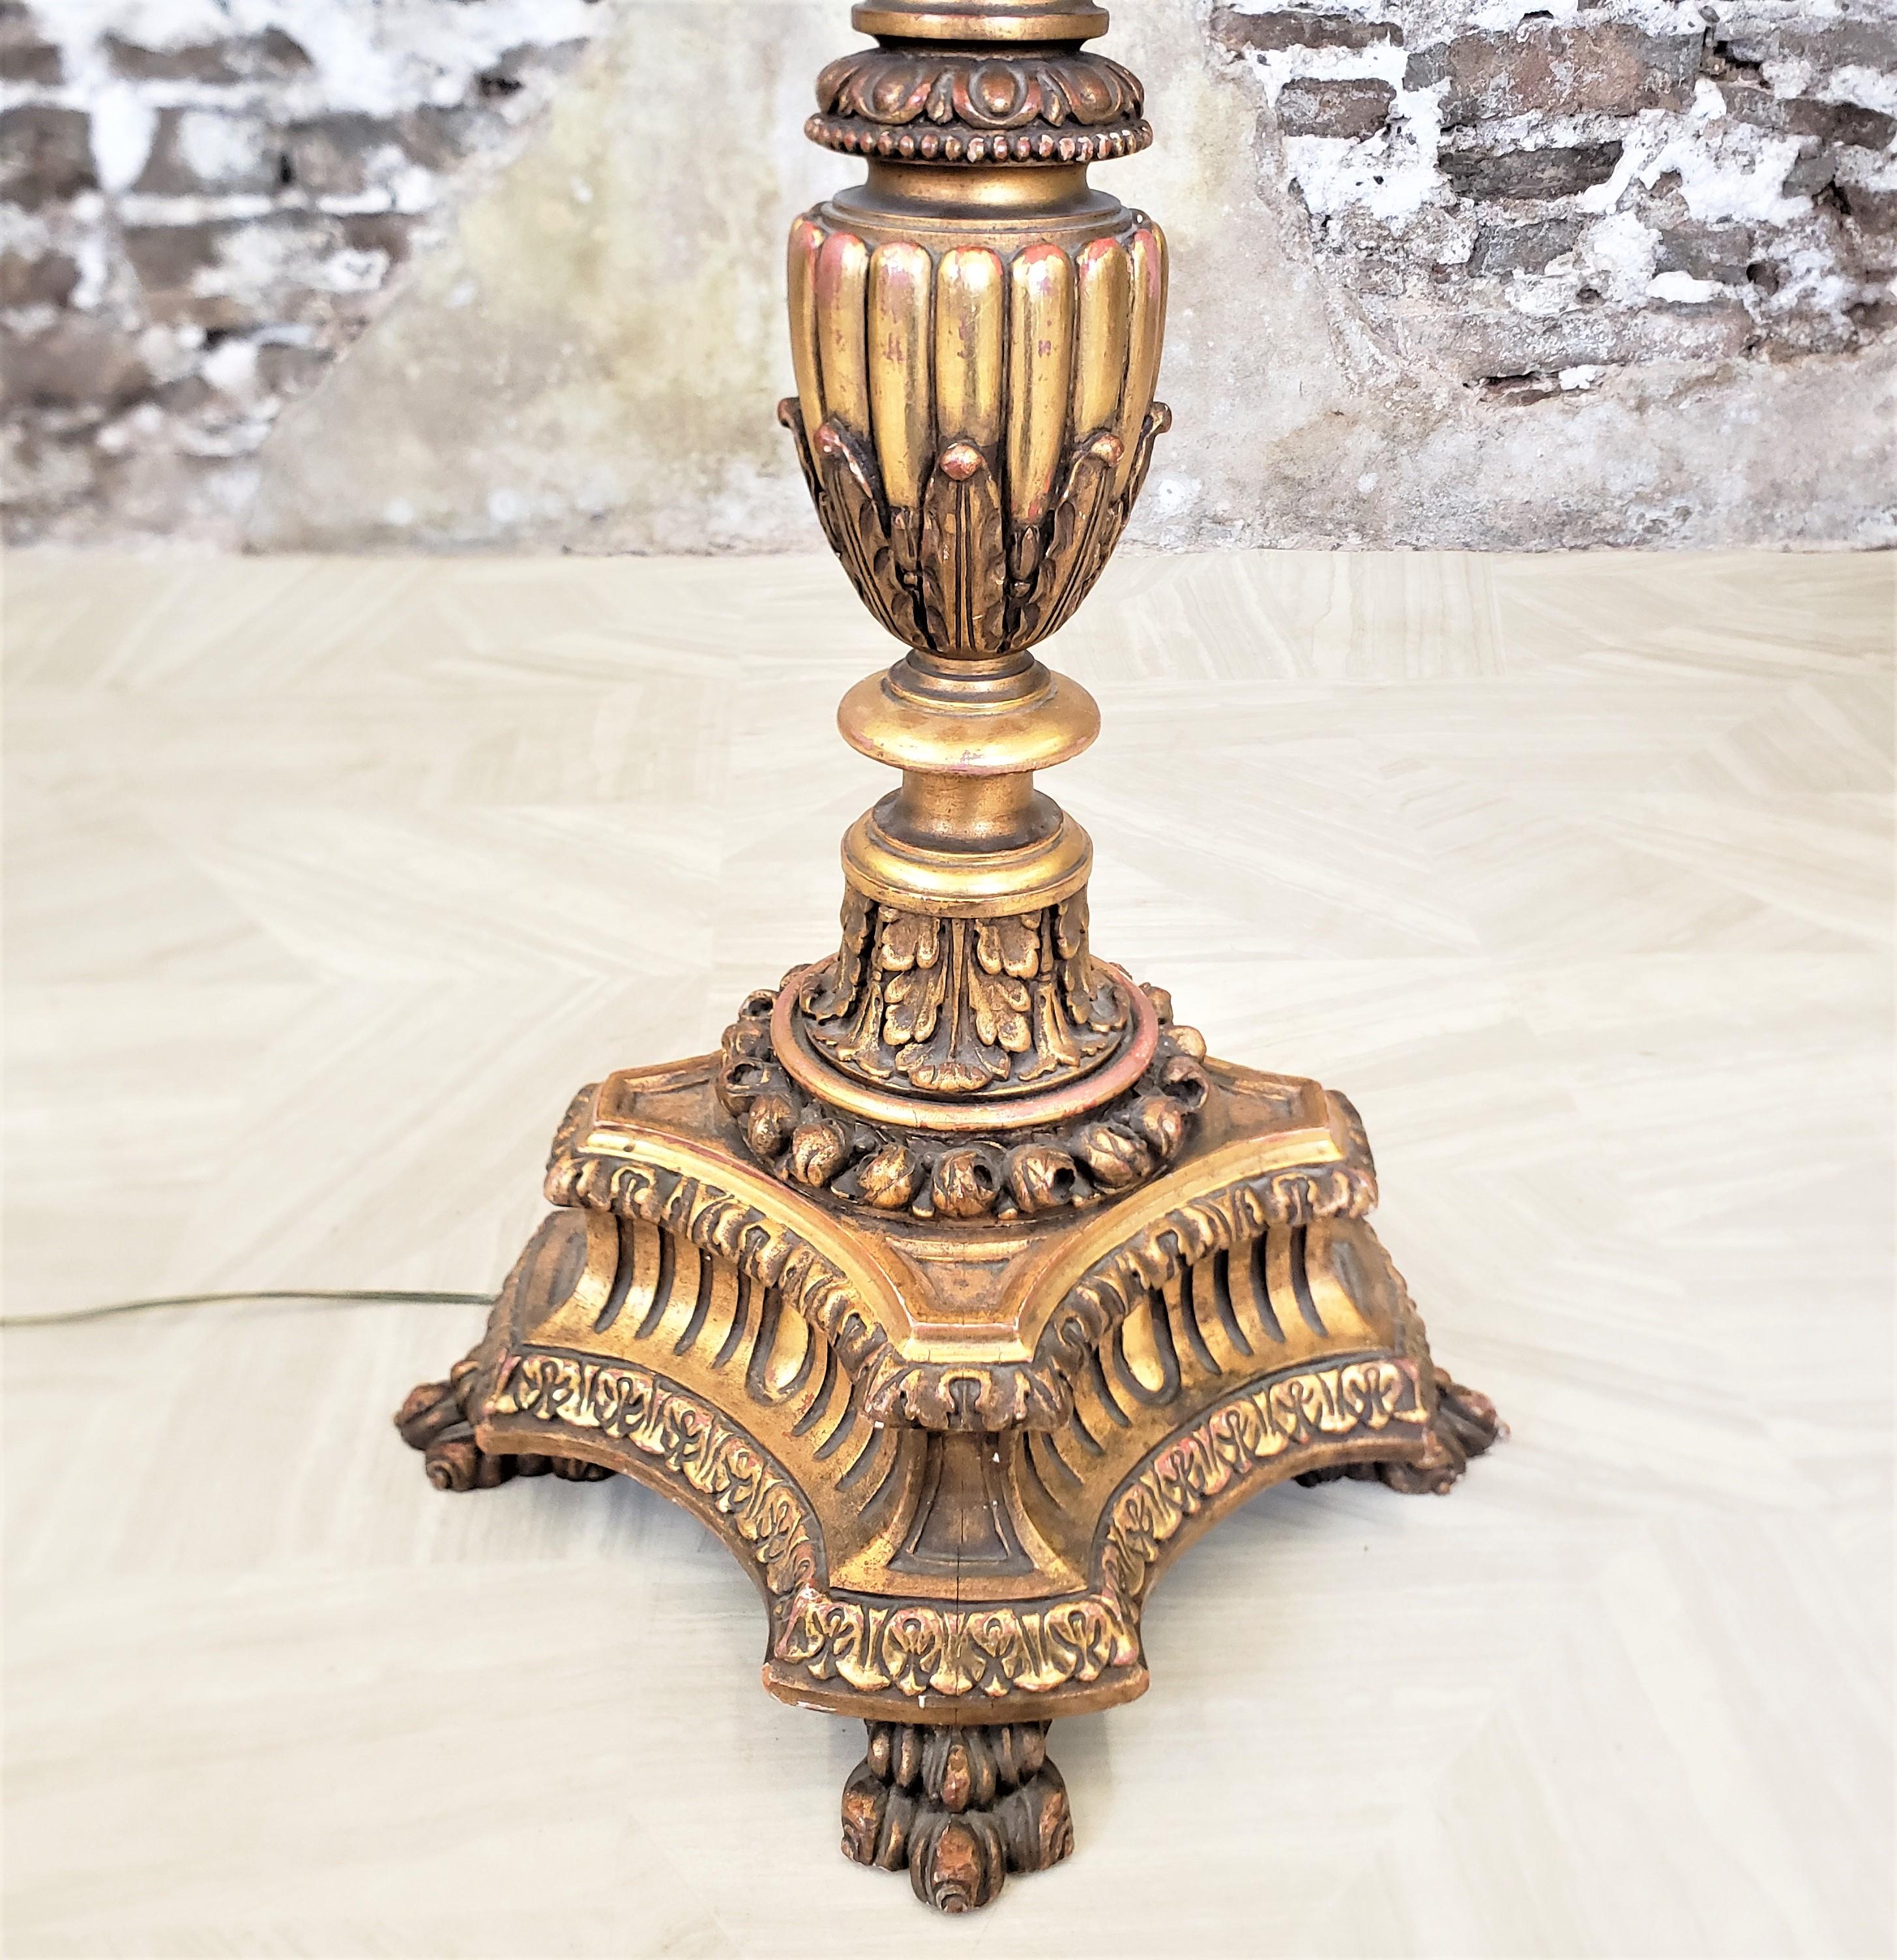 Antique Italian Florentine Hand-Carved & Gilt Finished Floor Lamp & Shade For Sale 7